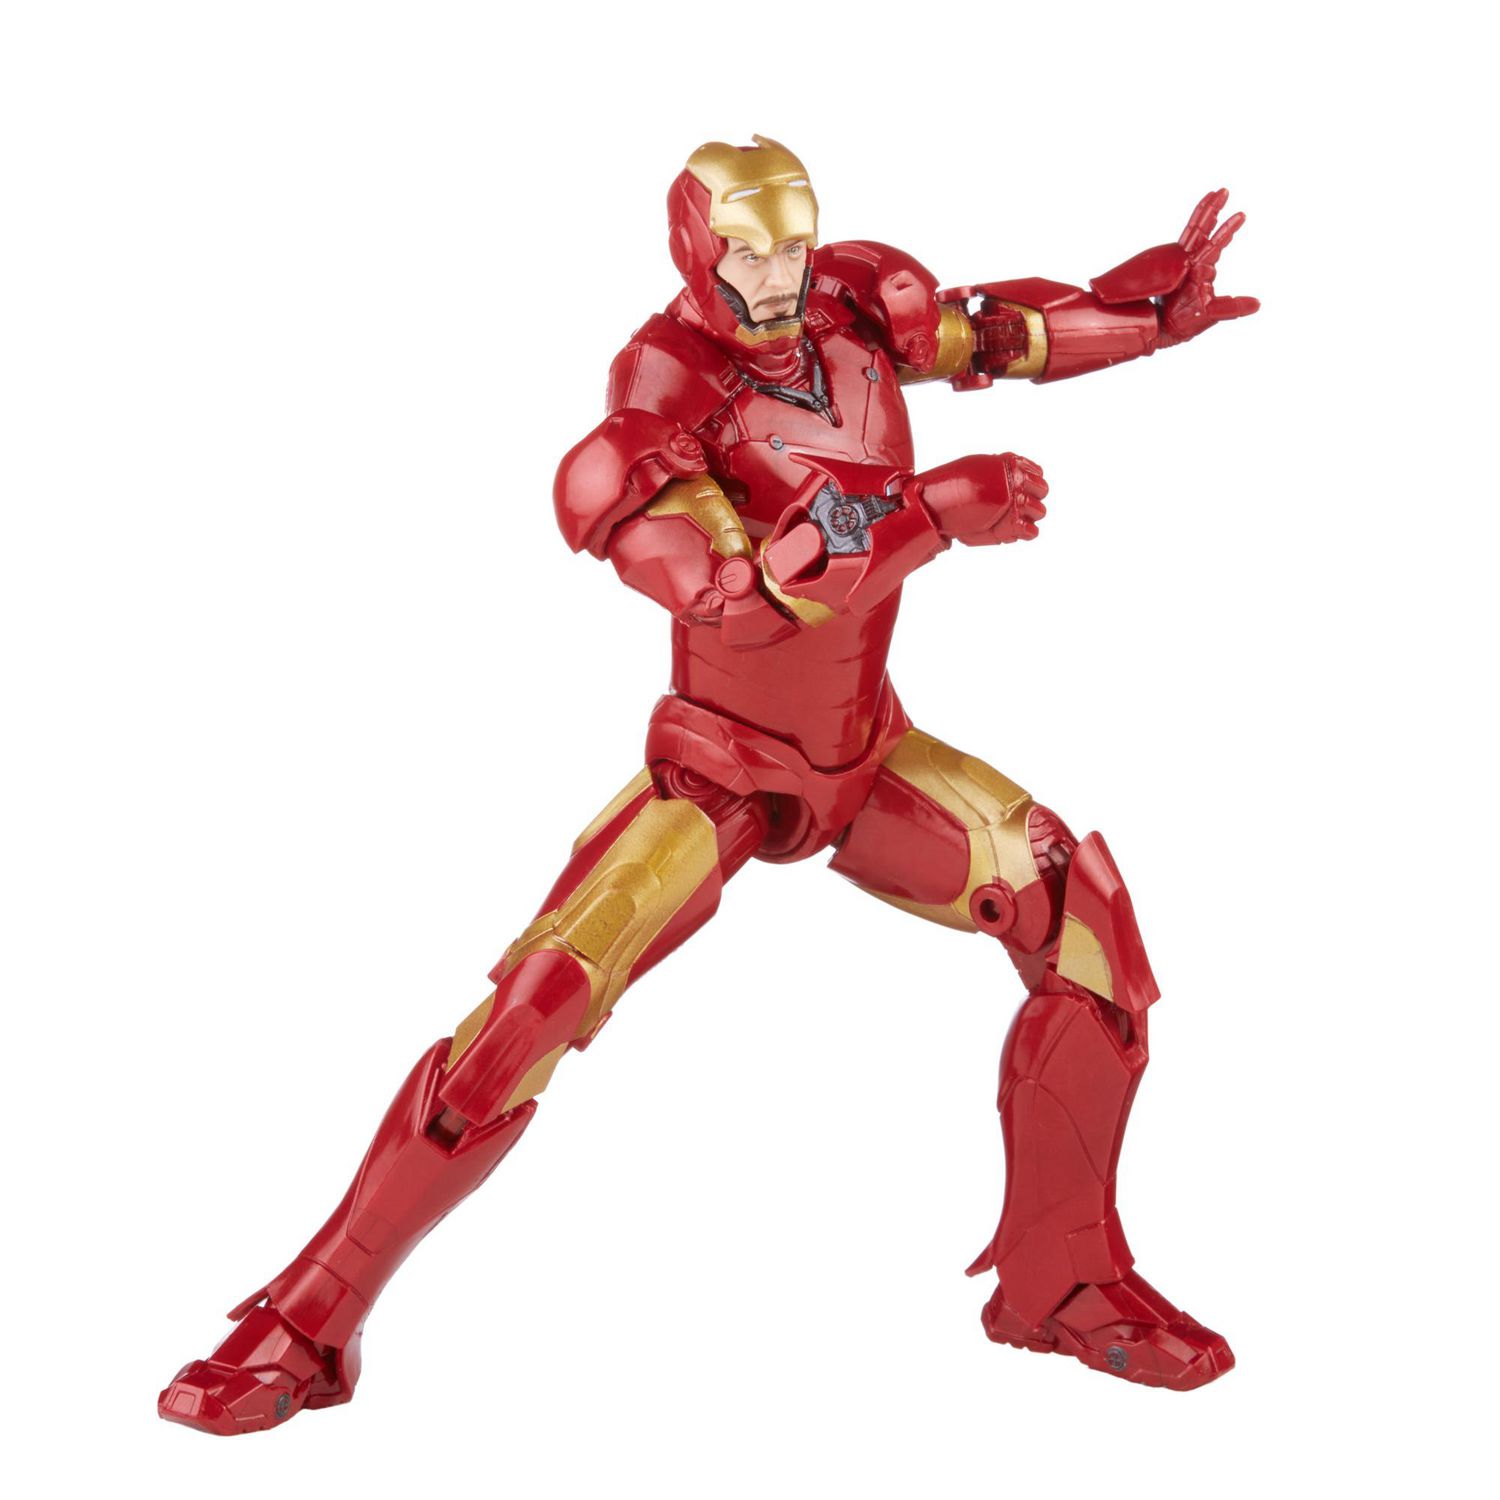 Hasbro Marvel Legends Series 6-inch Scale Action Figure Toy Iron